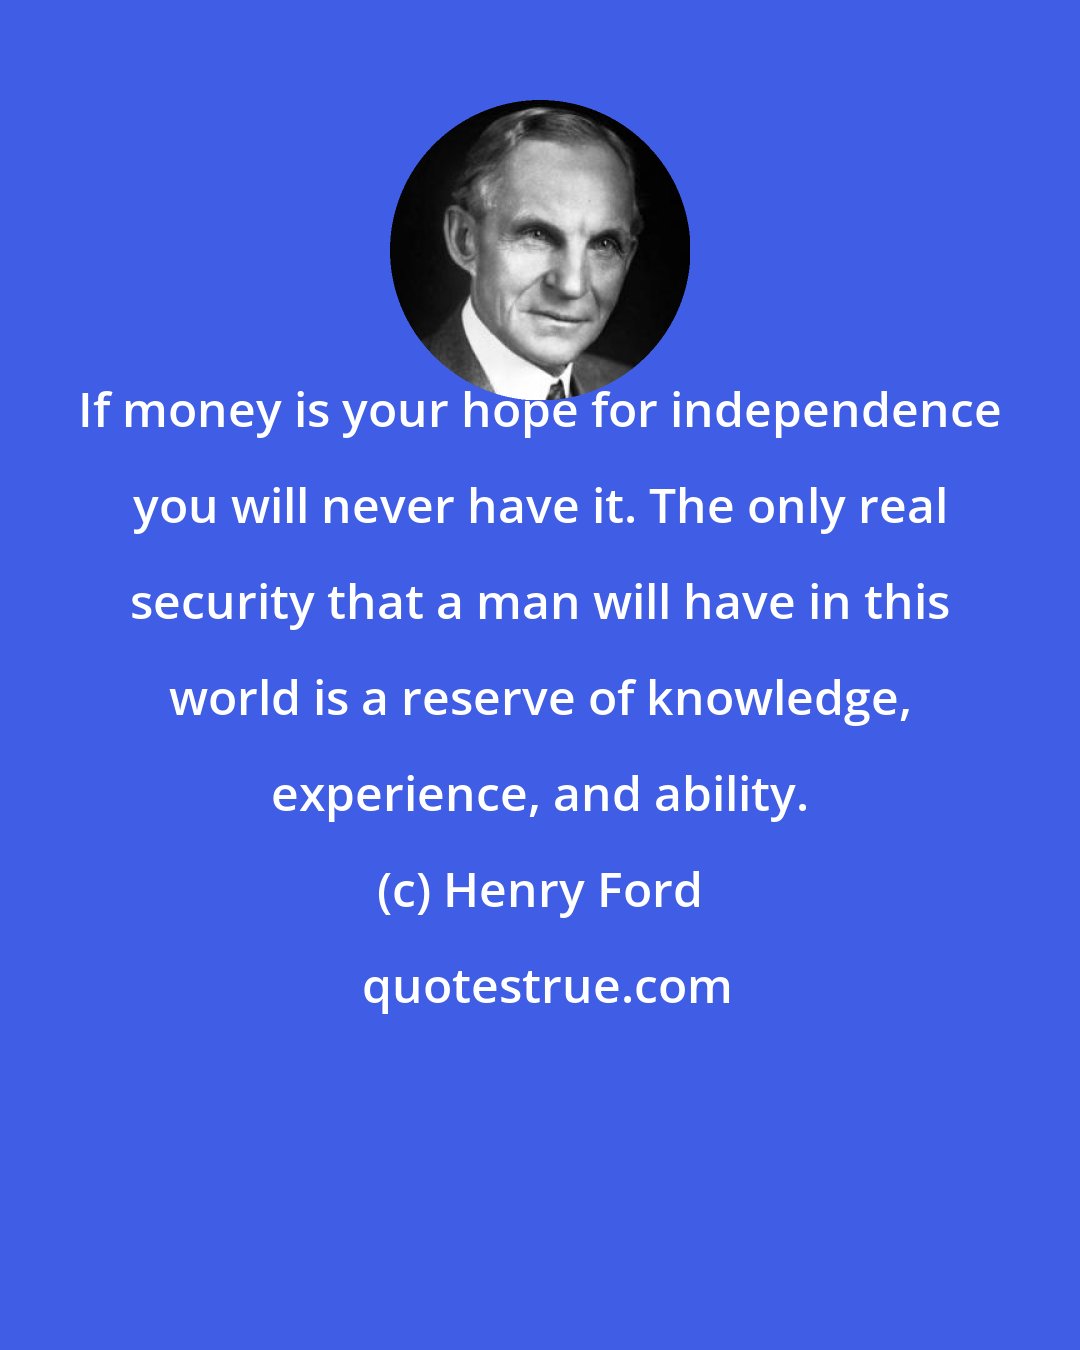 Henry Ford: If money is your hope for independence you will never have it. The only real security that a man will have in this world is a reserve of knowledge, experience, and ability.